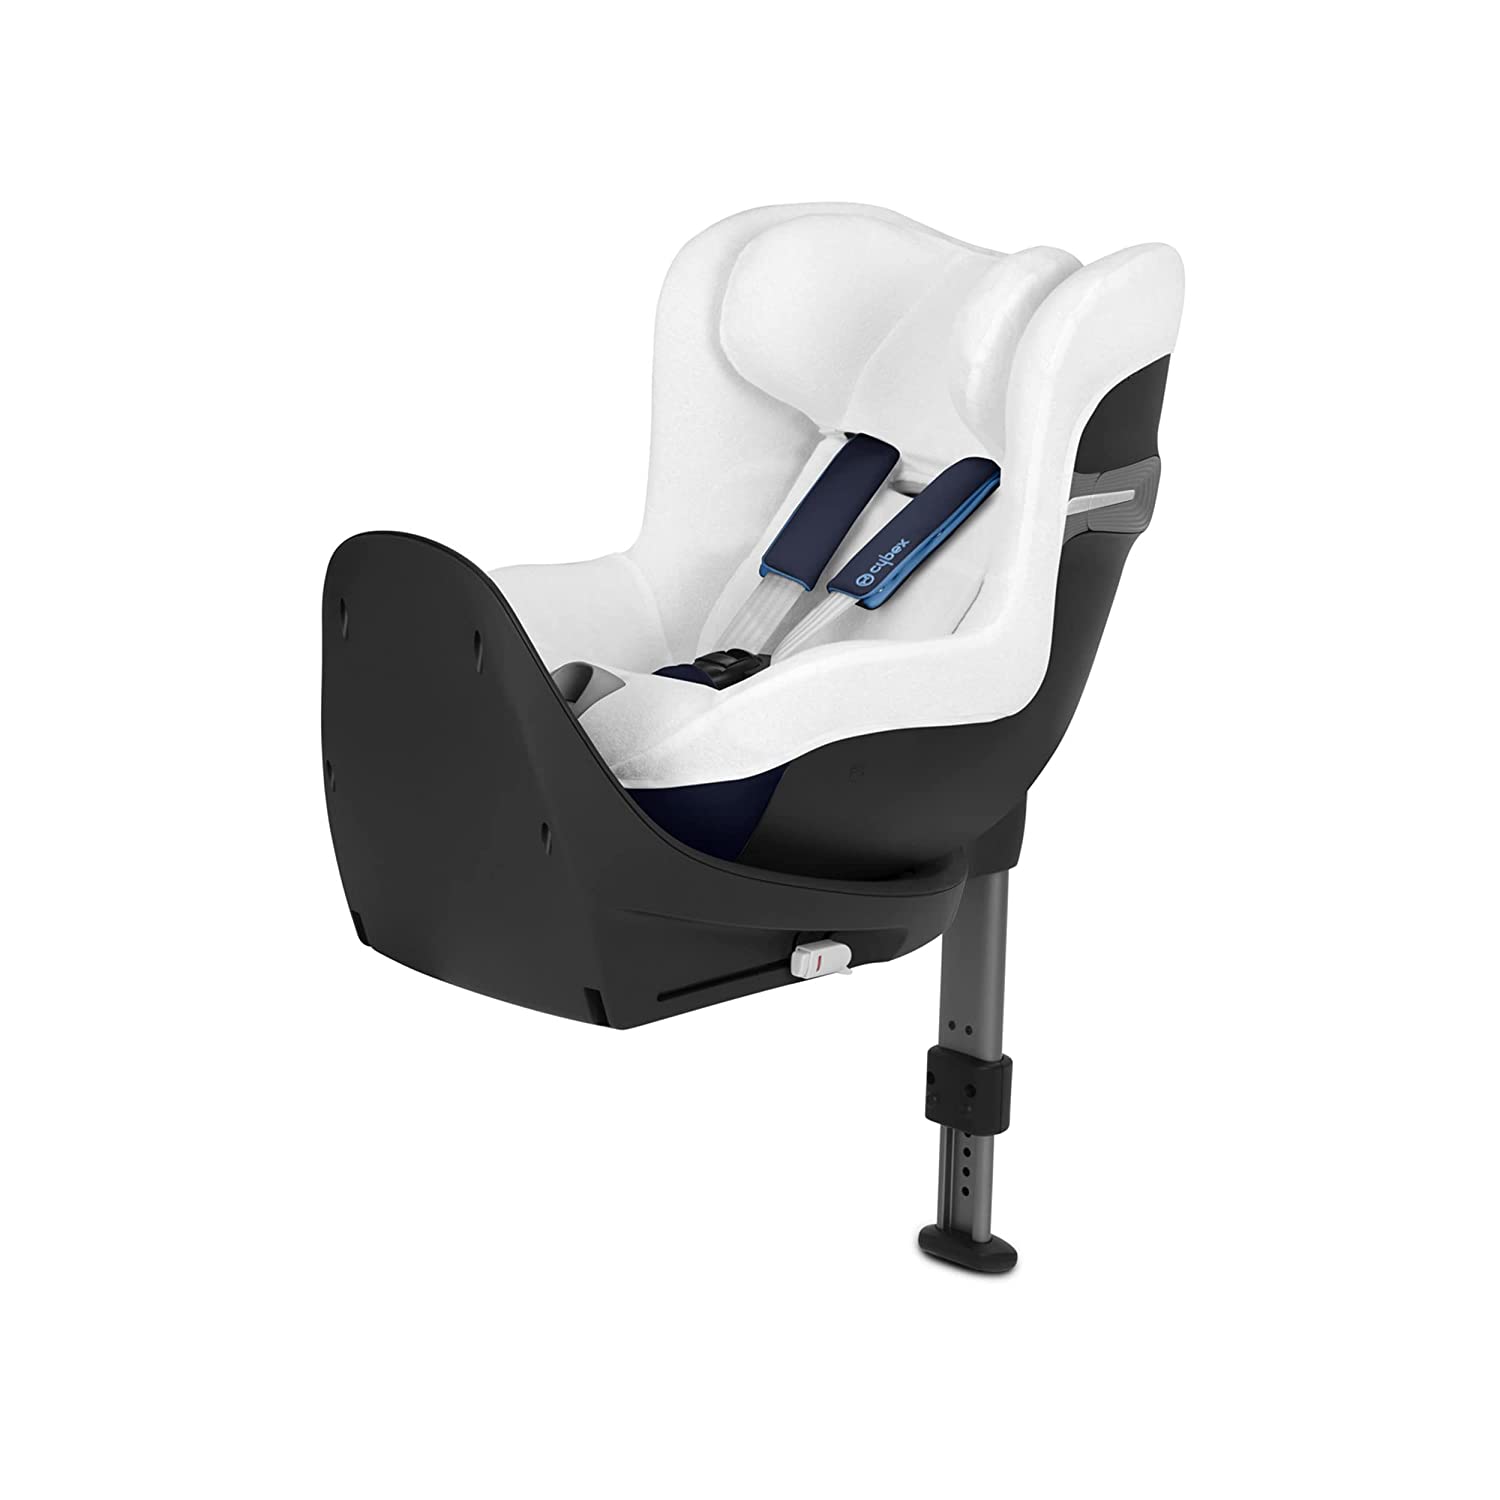 CYBEX Gold Summer Cover for Sirona M2 i-Size Child Car Seat - White